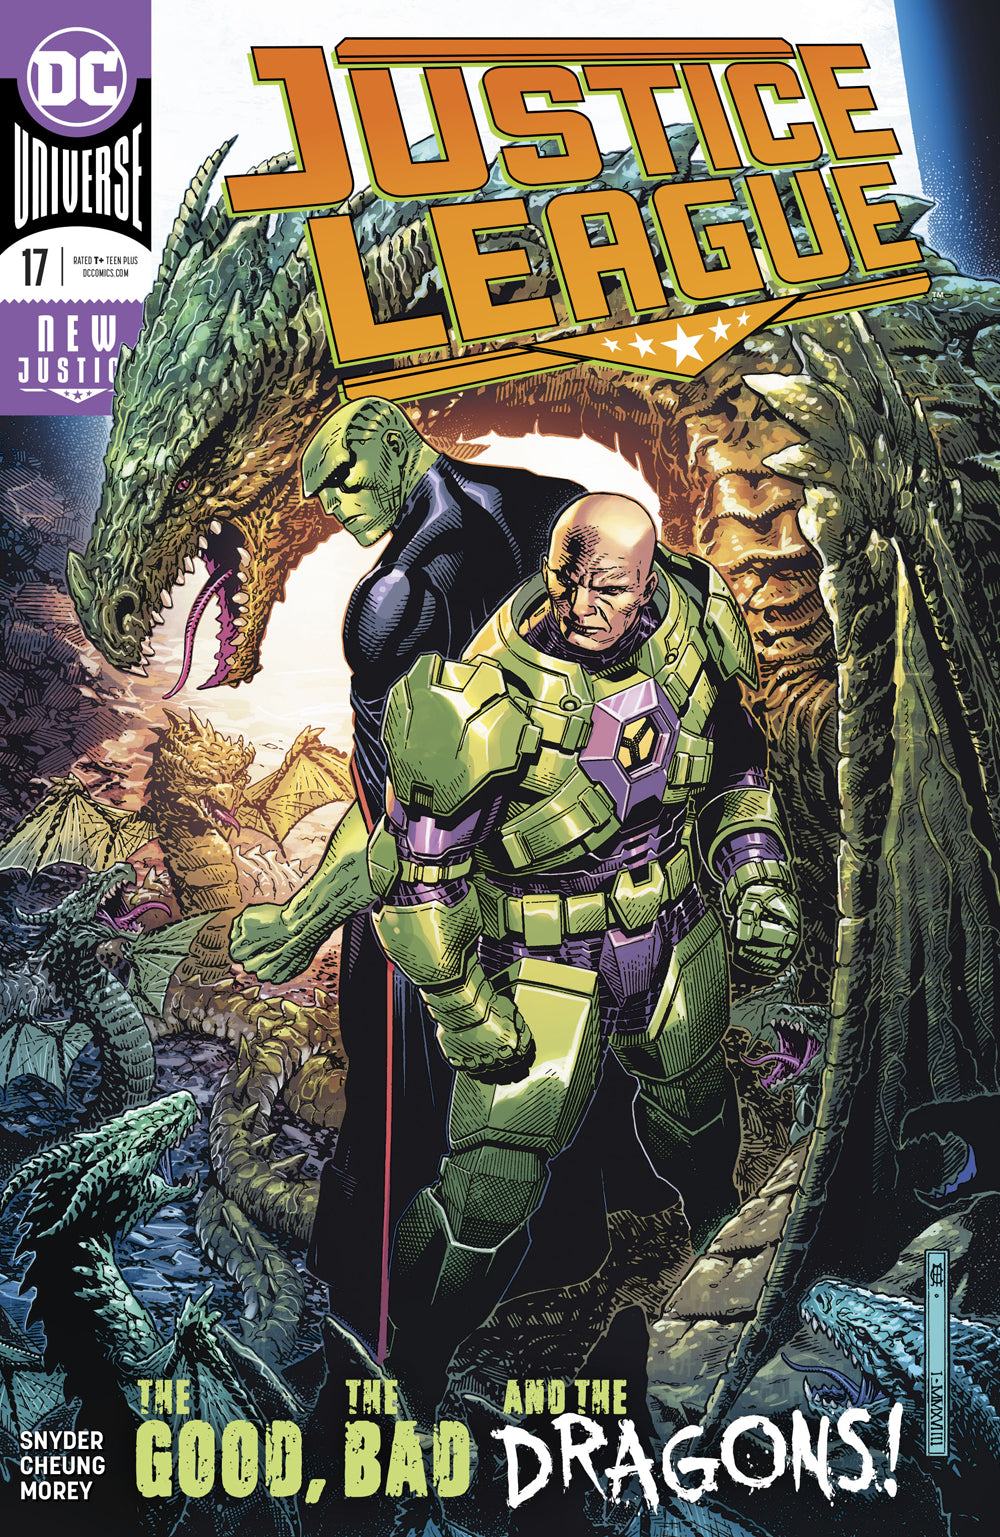 JUSTICE LEAGUE #17 | Game Master's Emporium (The New GME)